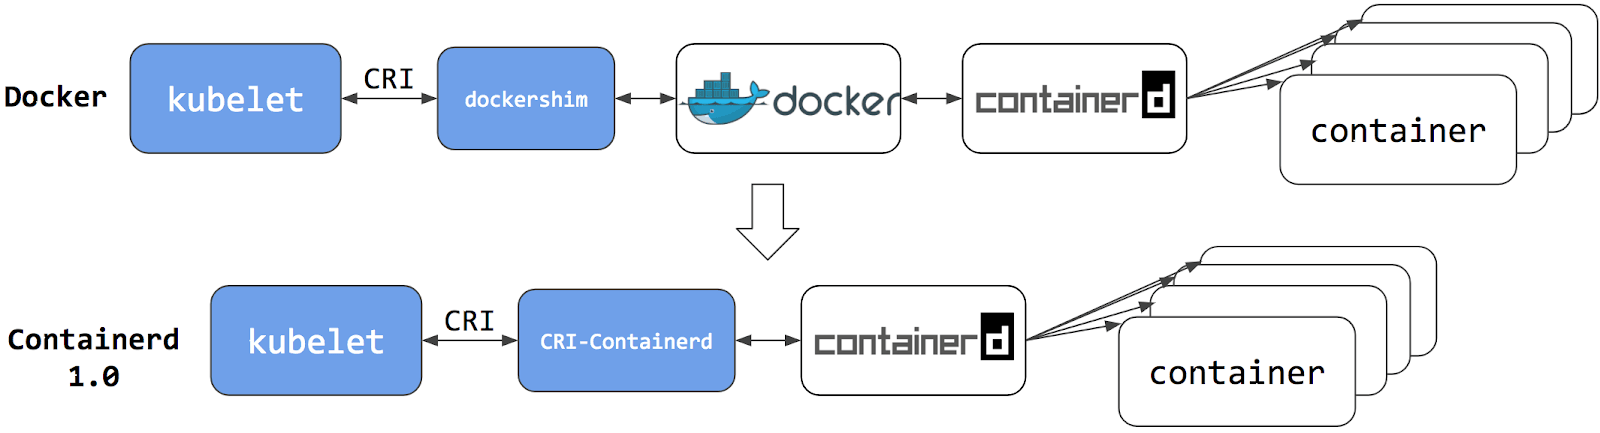 Kubernetes workflow via containerd compared with dockershim